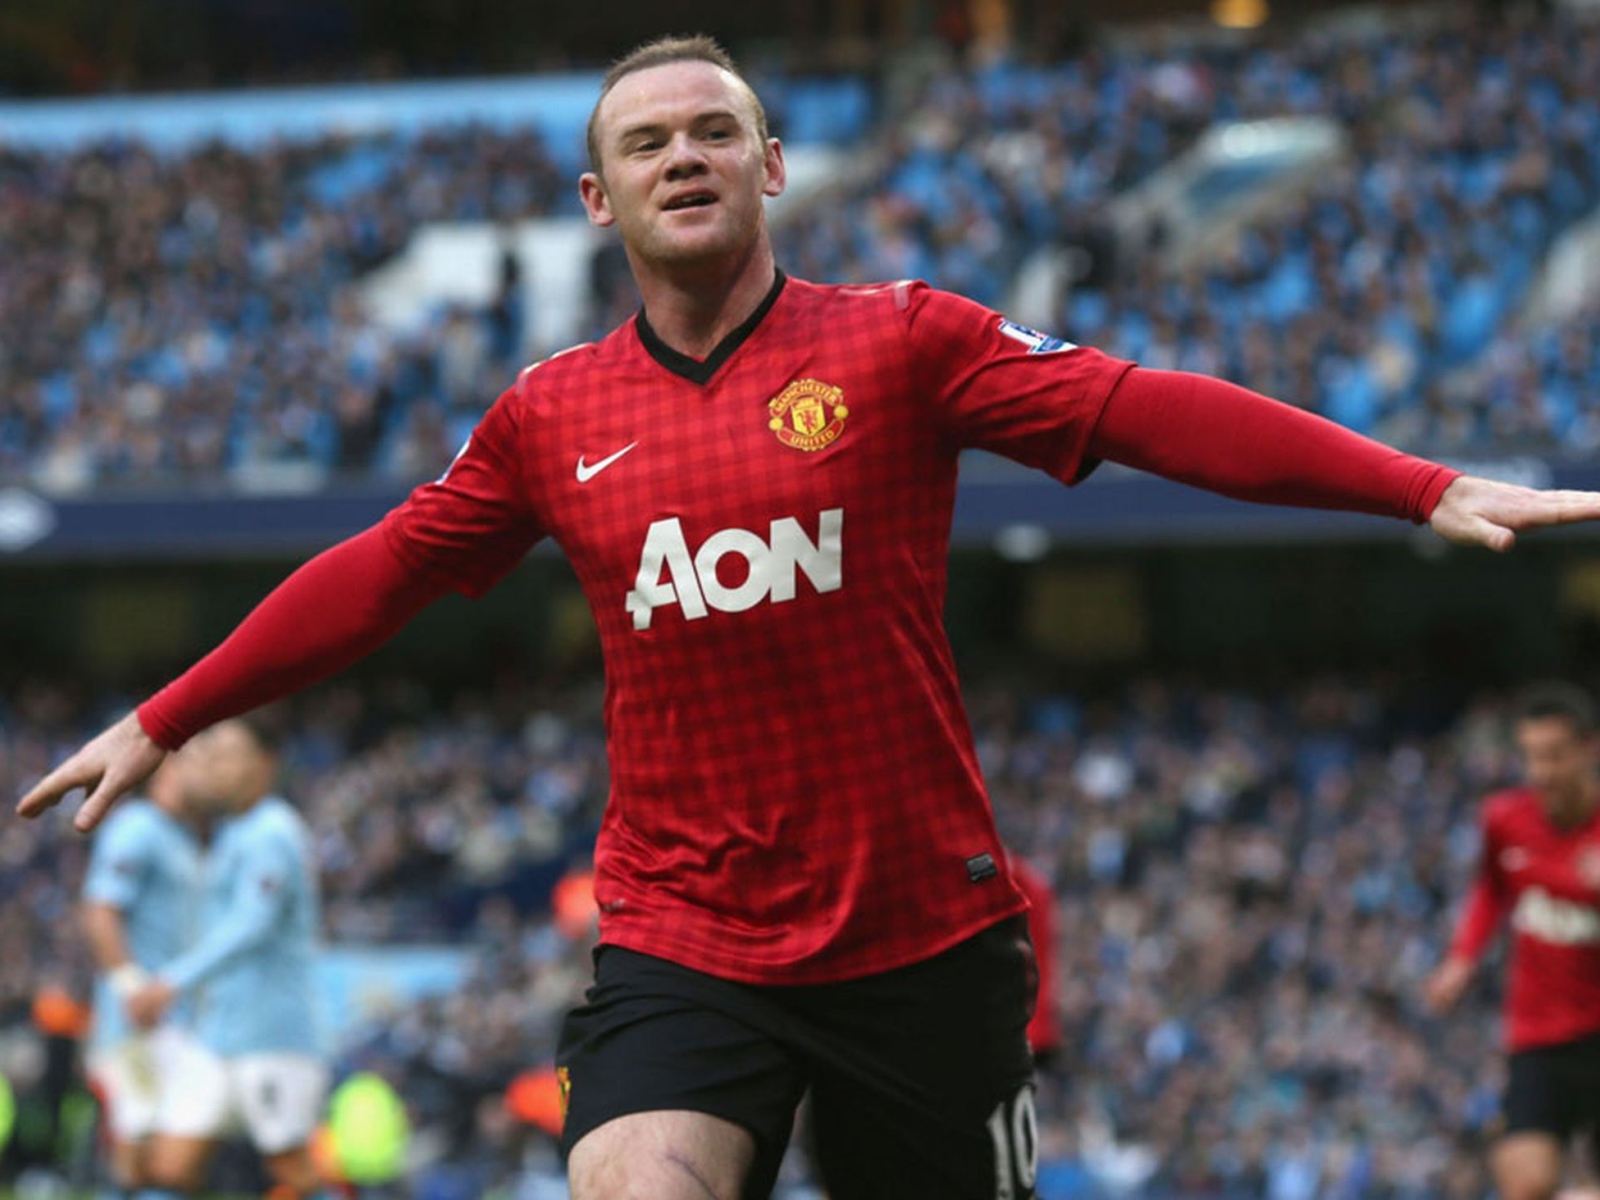 The forward of Manchester United Wayne Rooney